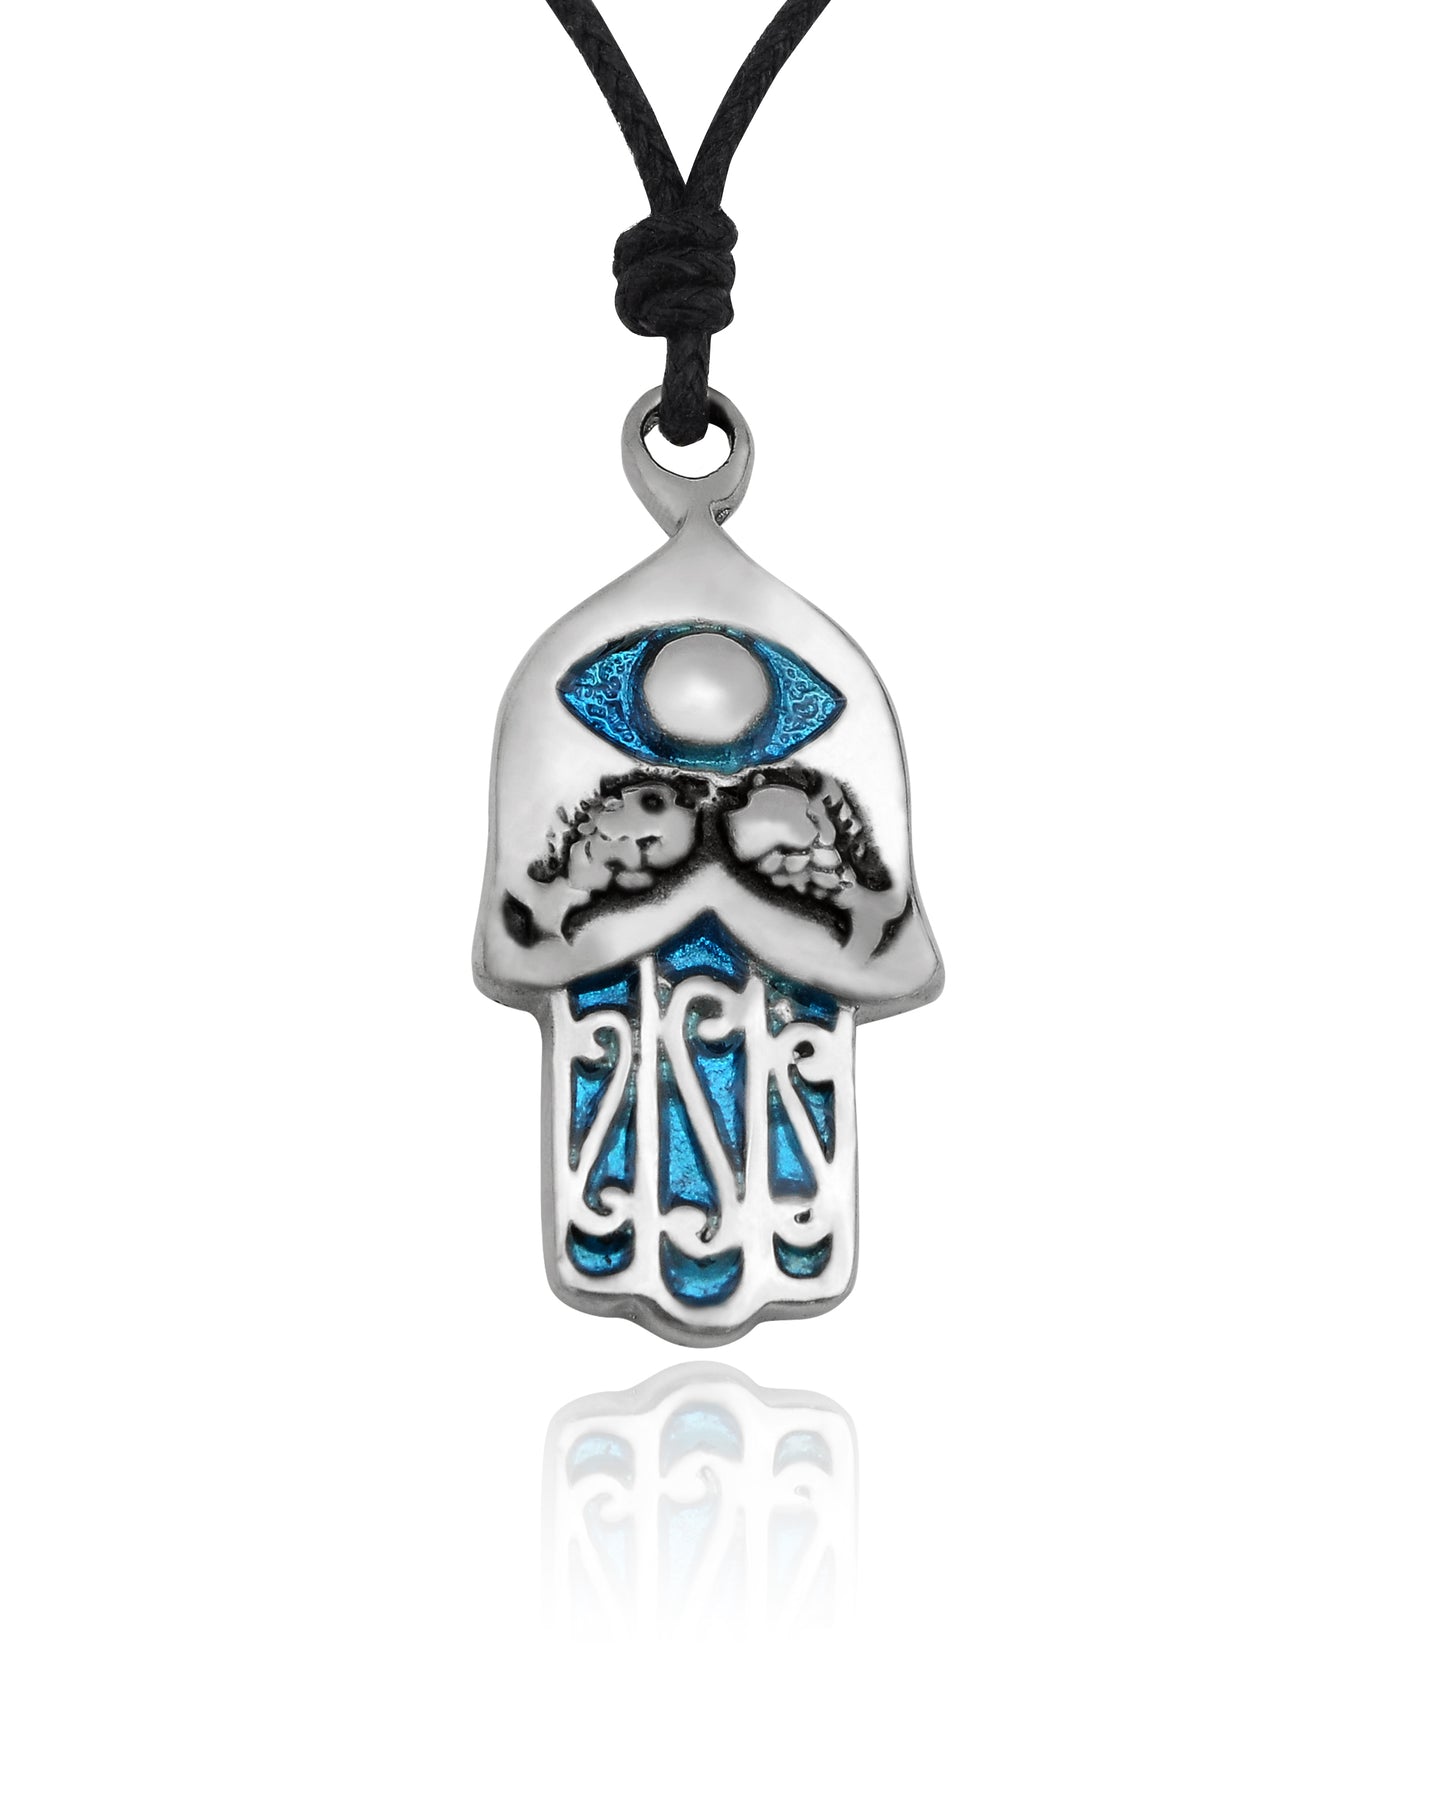 Colorful Hamsa Silver Pewter Charm Necklace Pendant Jewelry